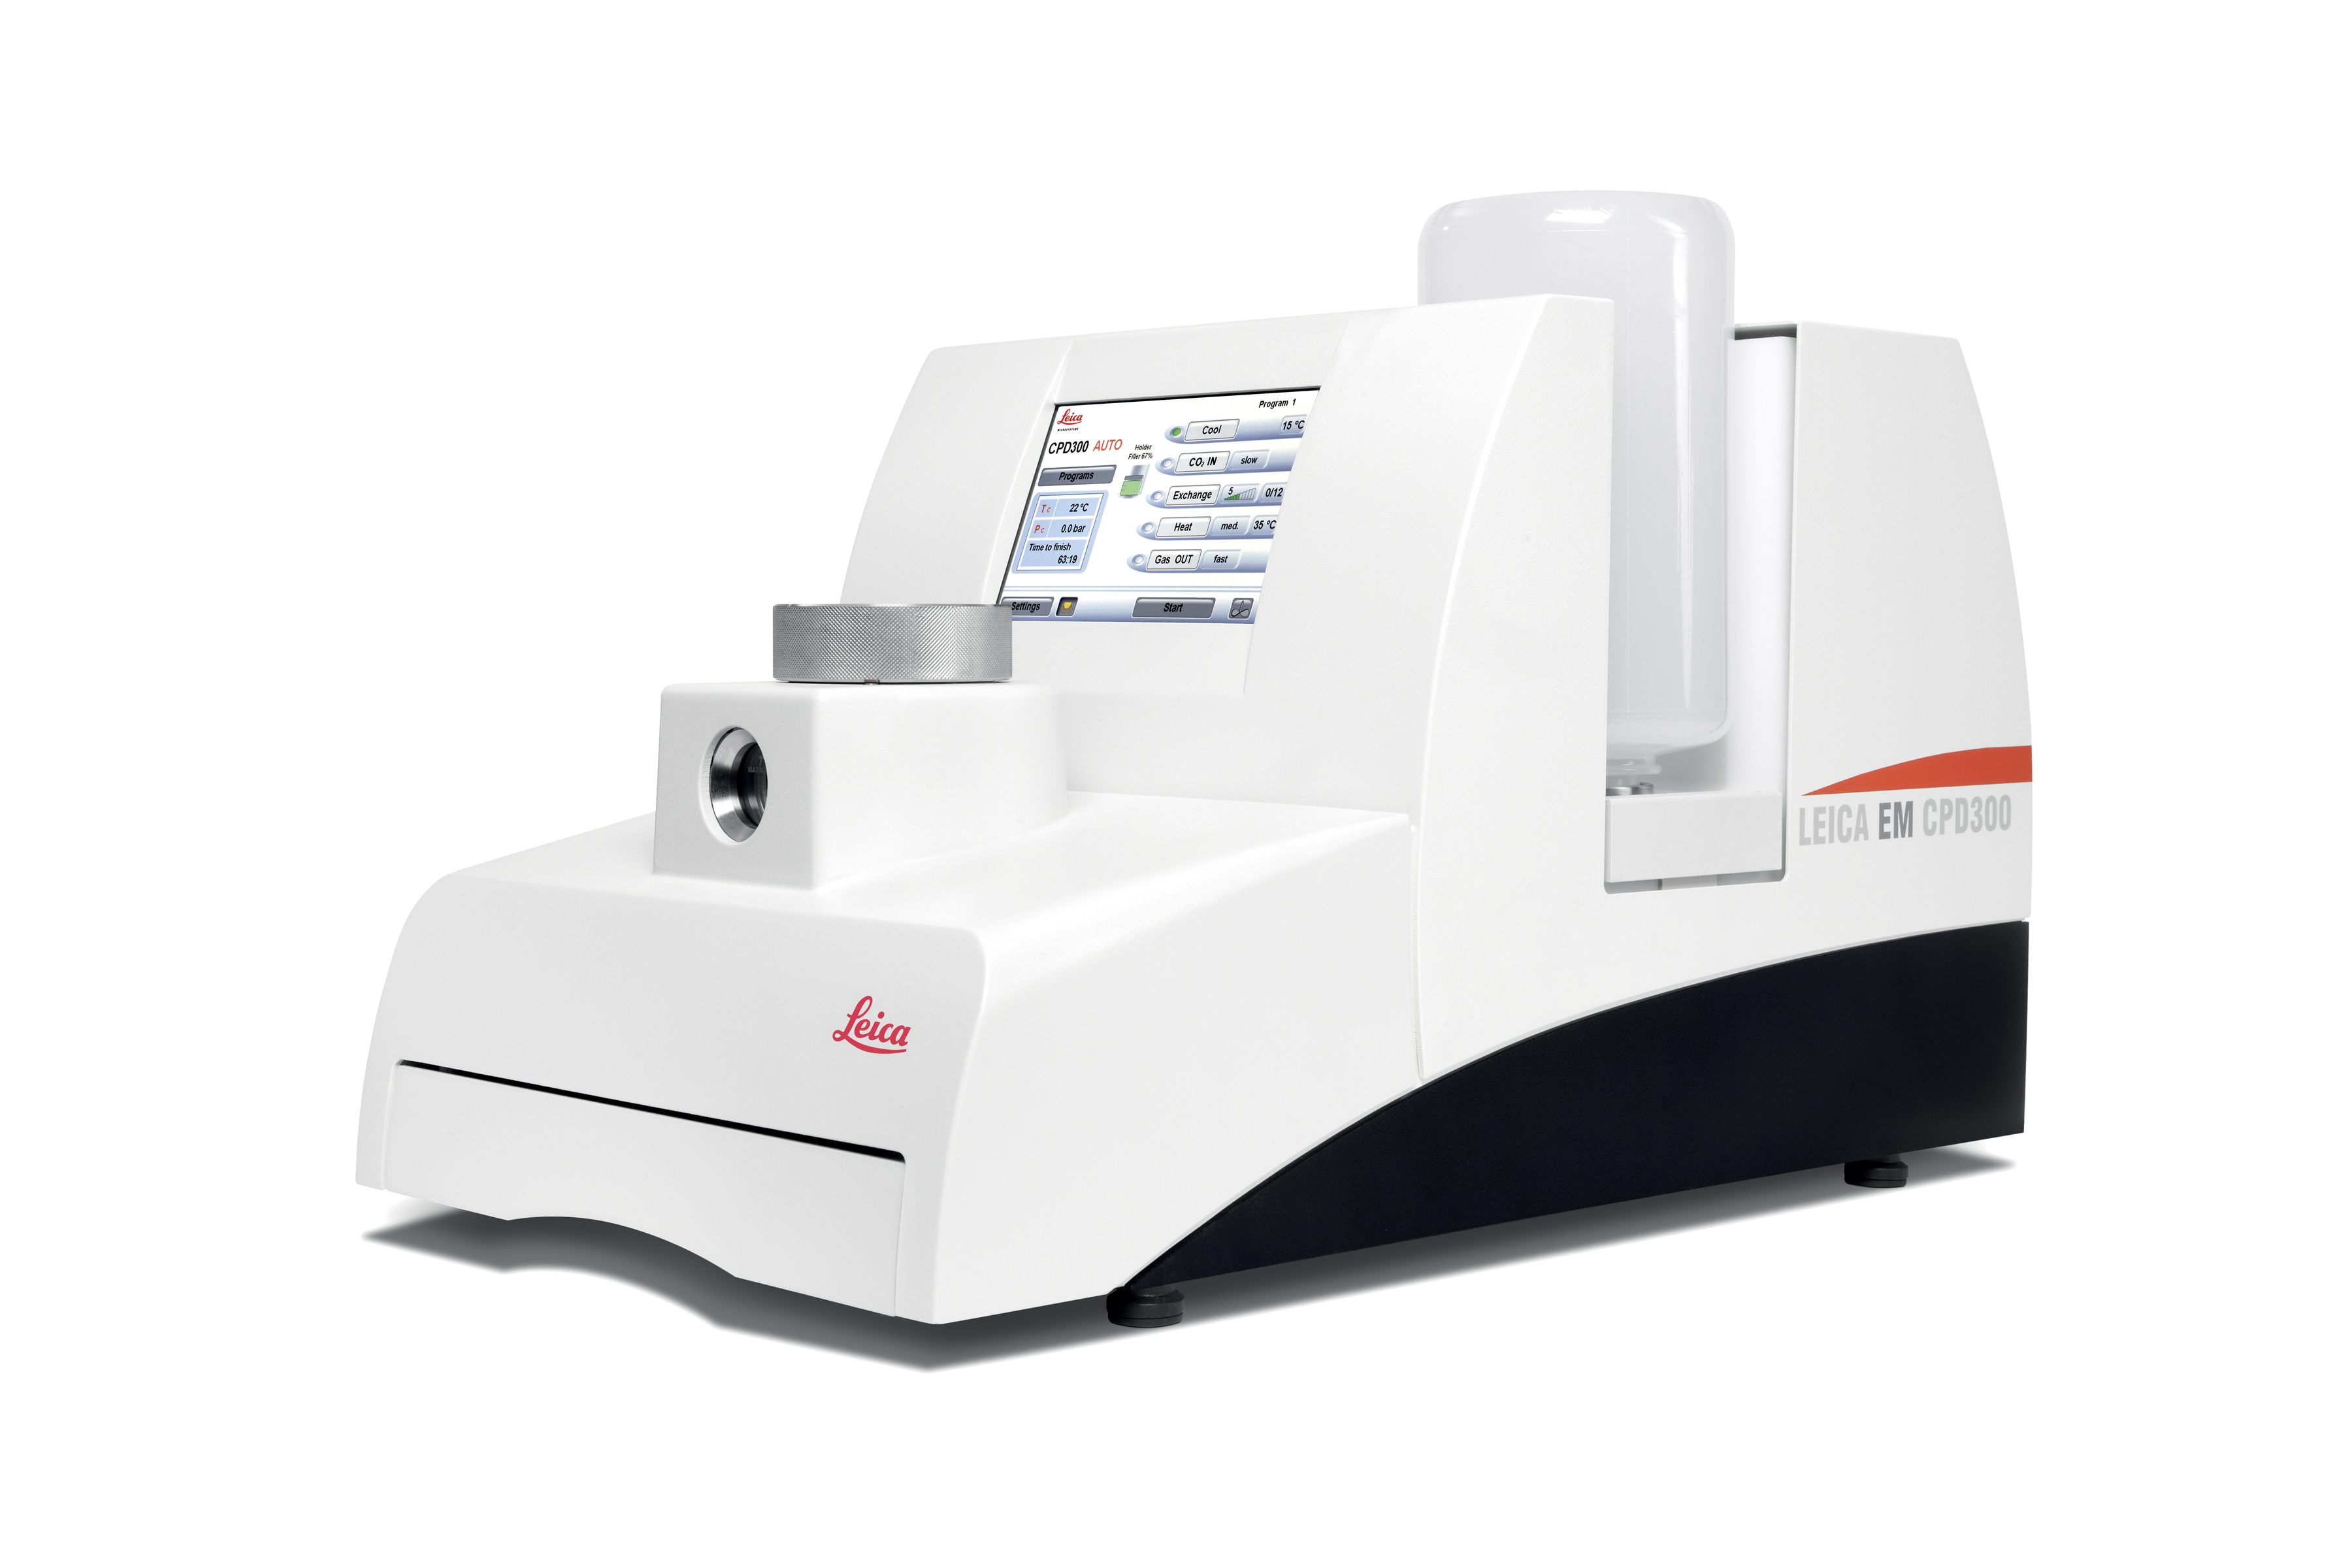 Leica EM CPD300 Automated Critical Point Dryer